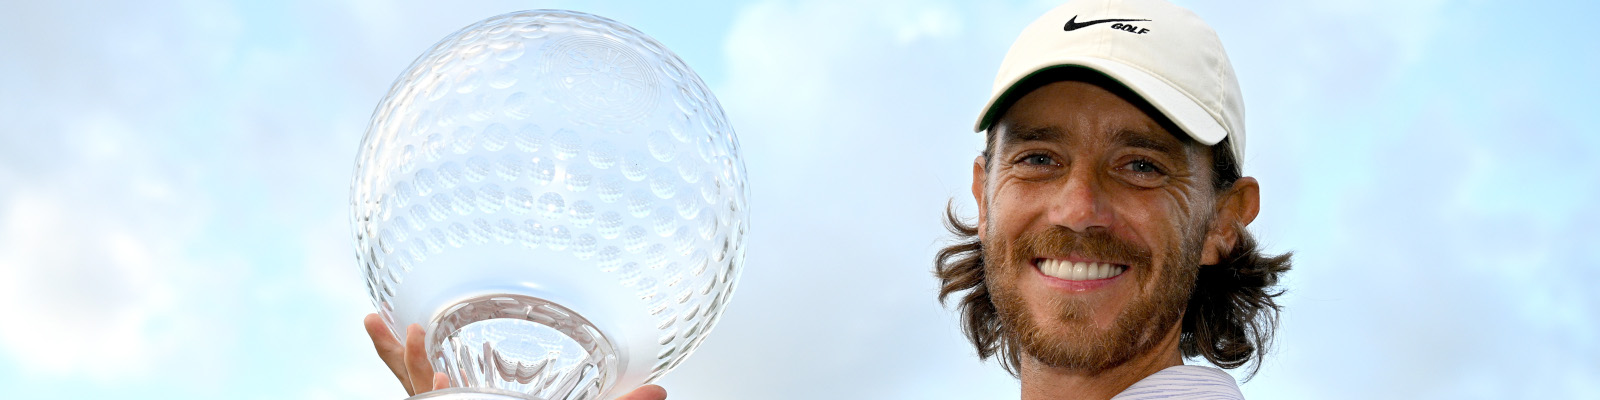 Tommy Fleetwood (Photo by Getty Images)